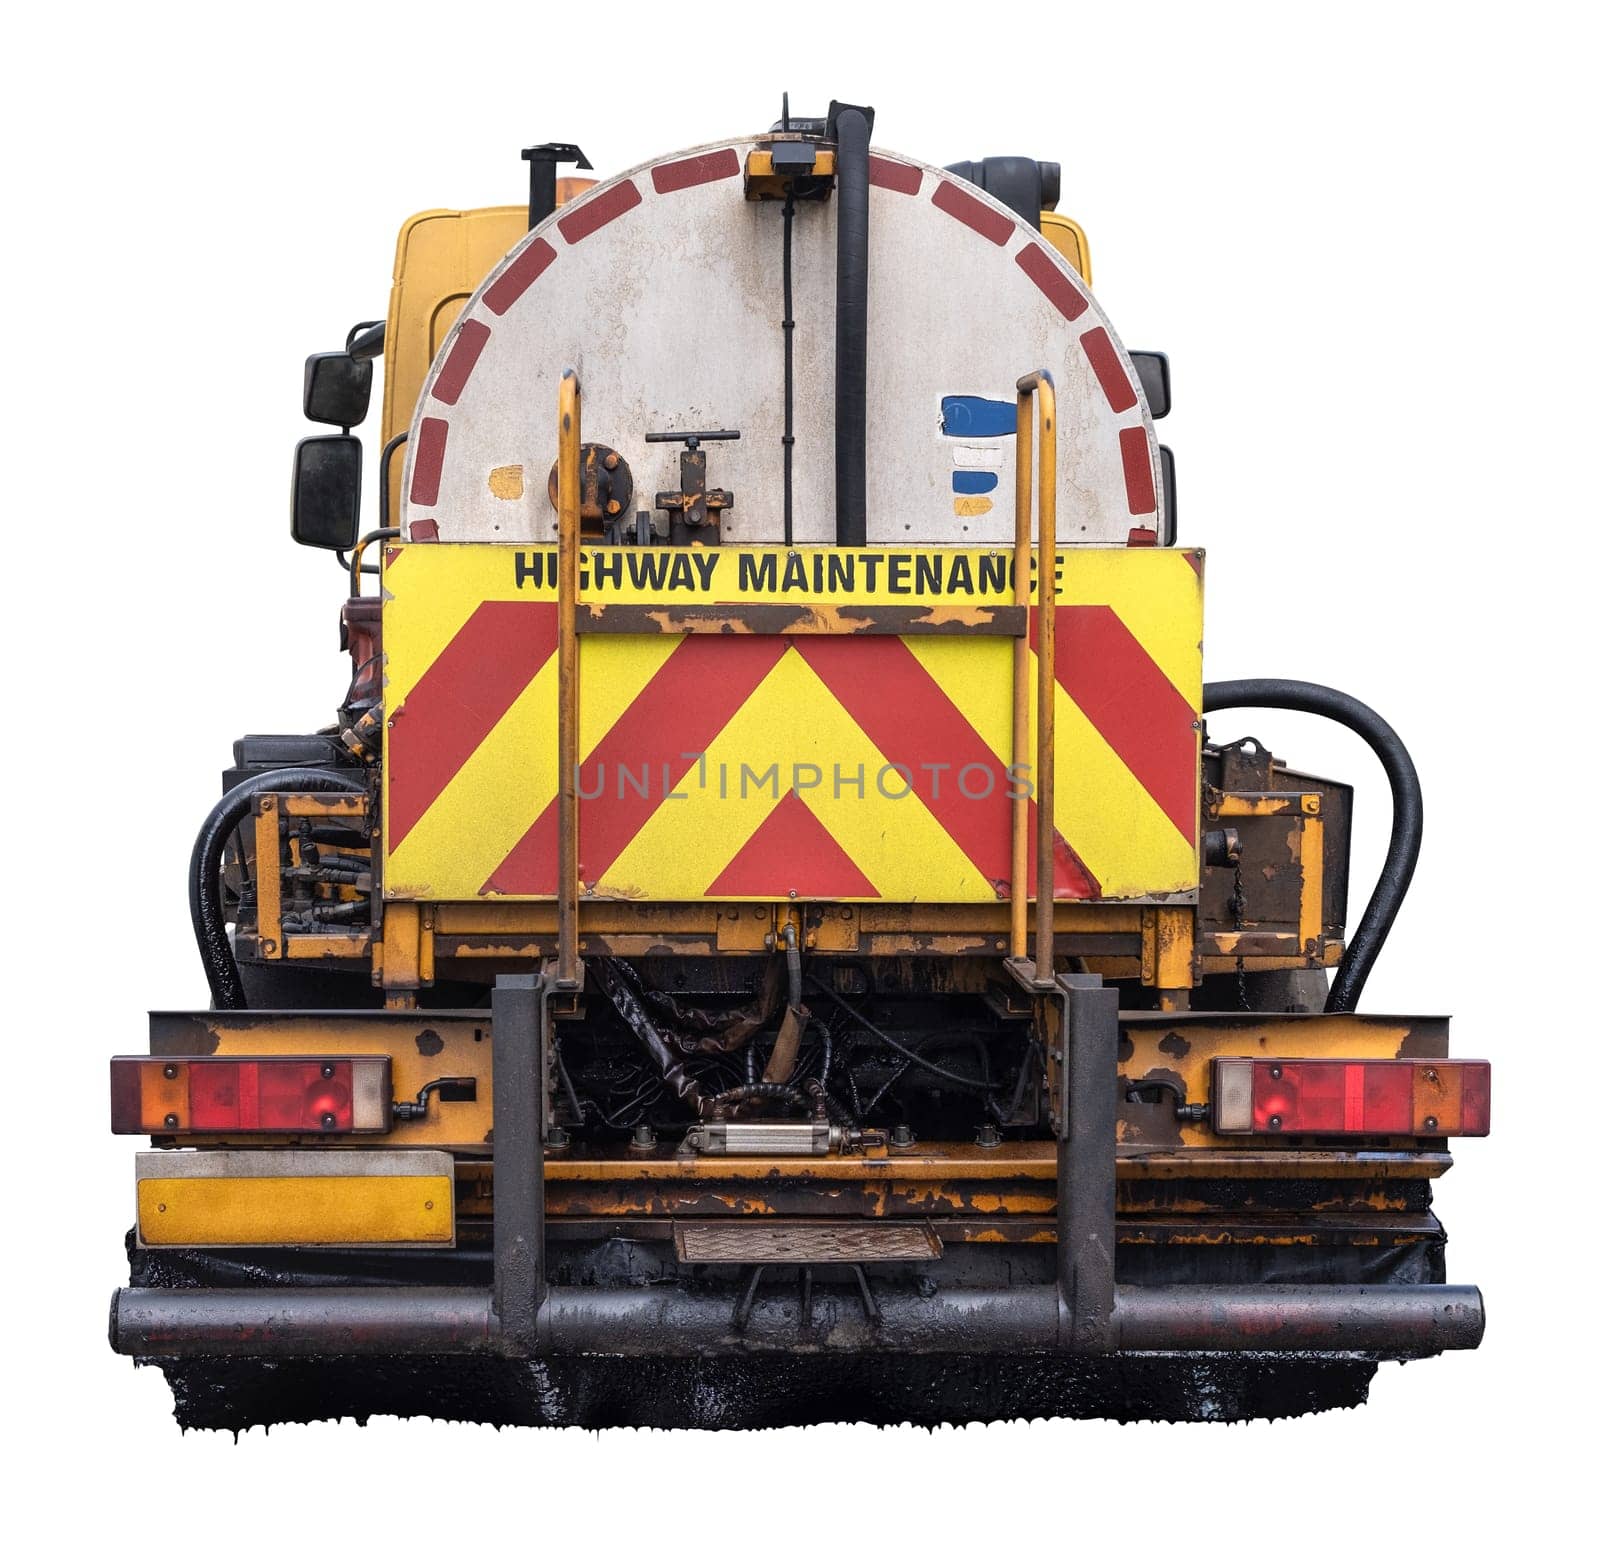 A Grungy Highway Maintenance Truck For Tarmac Surfacing, Isolated On A White Background